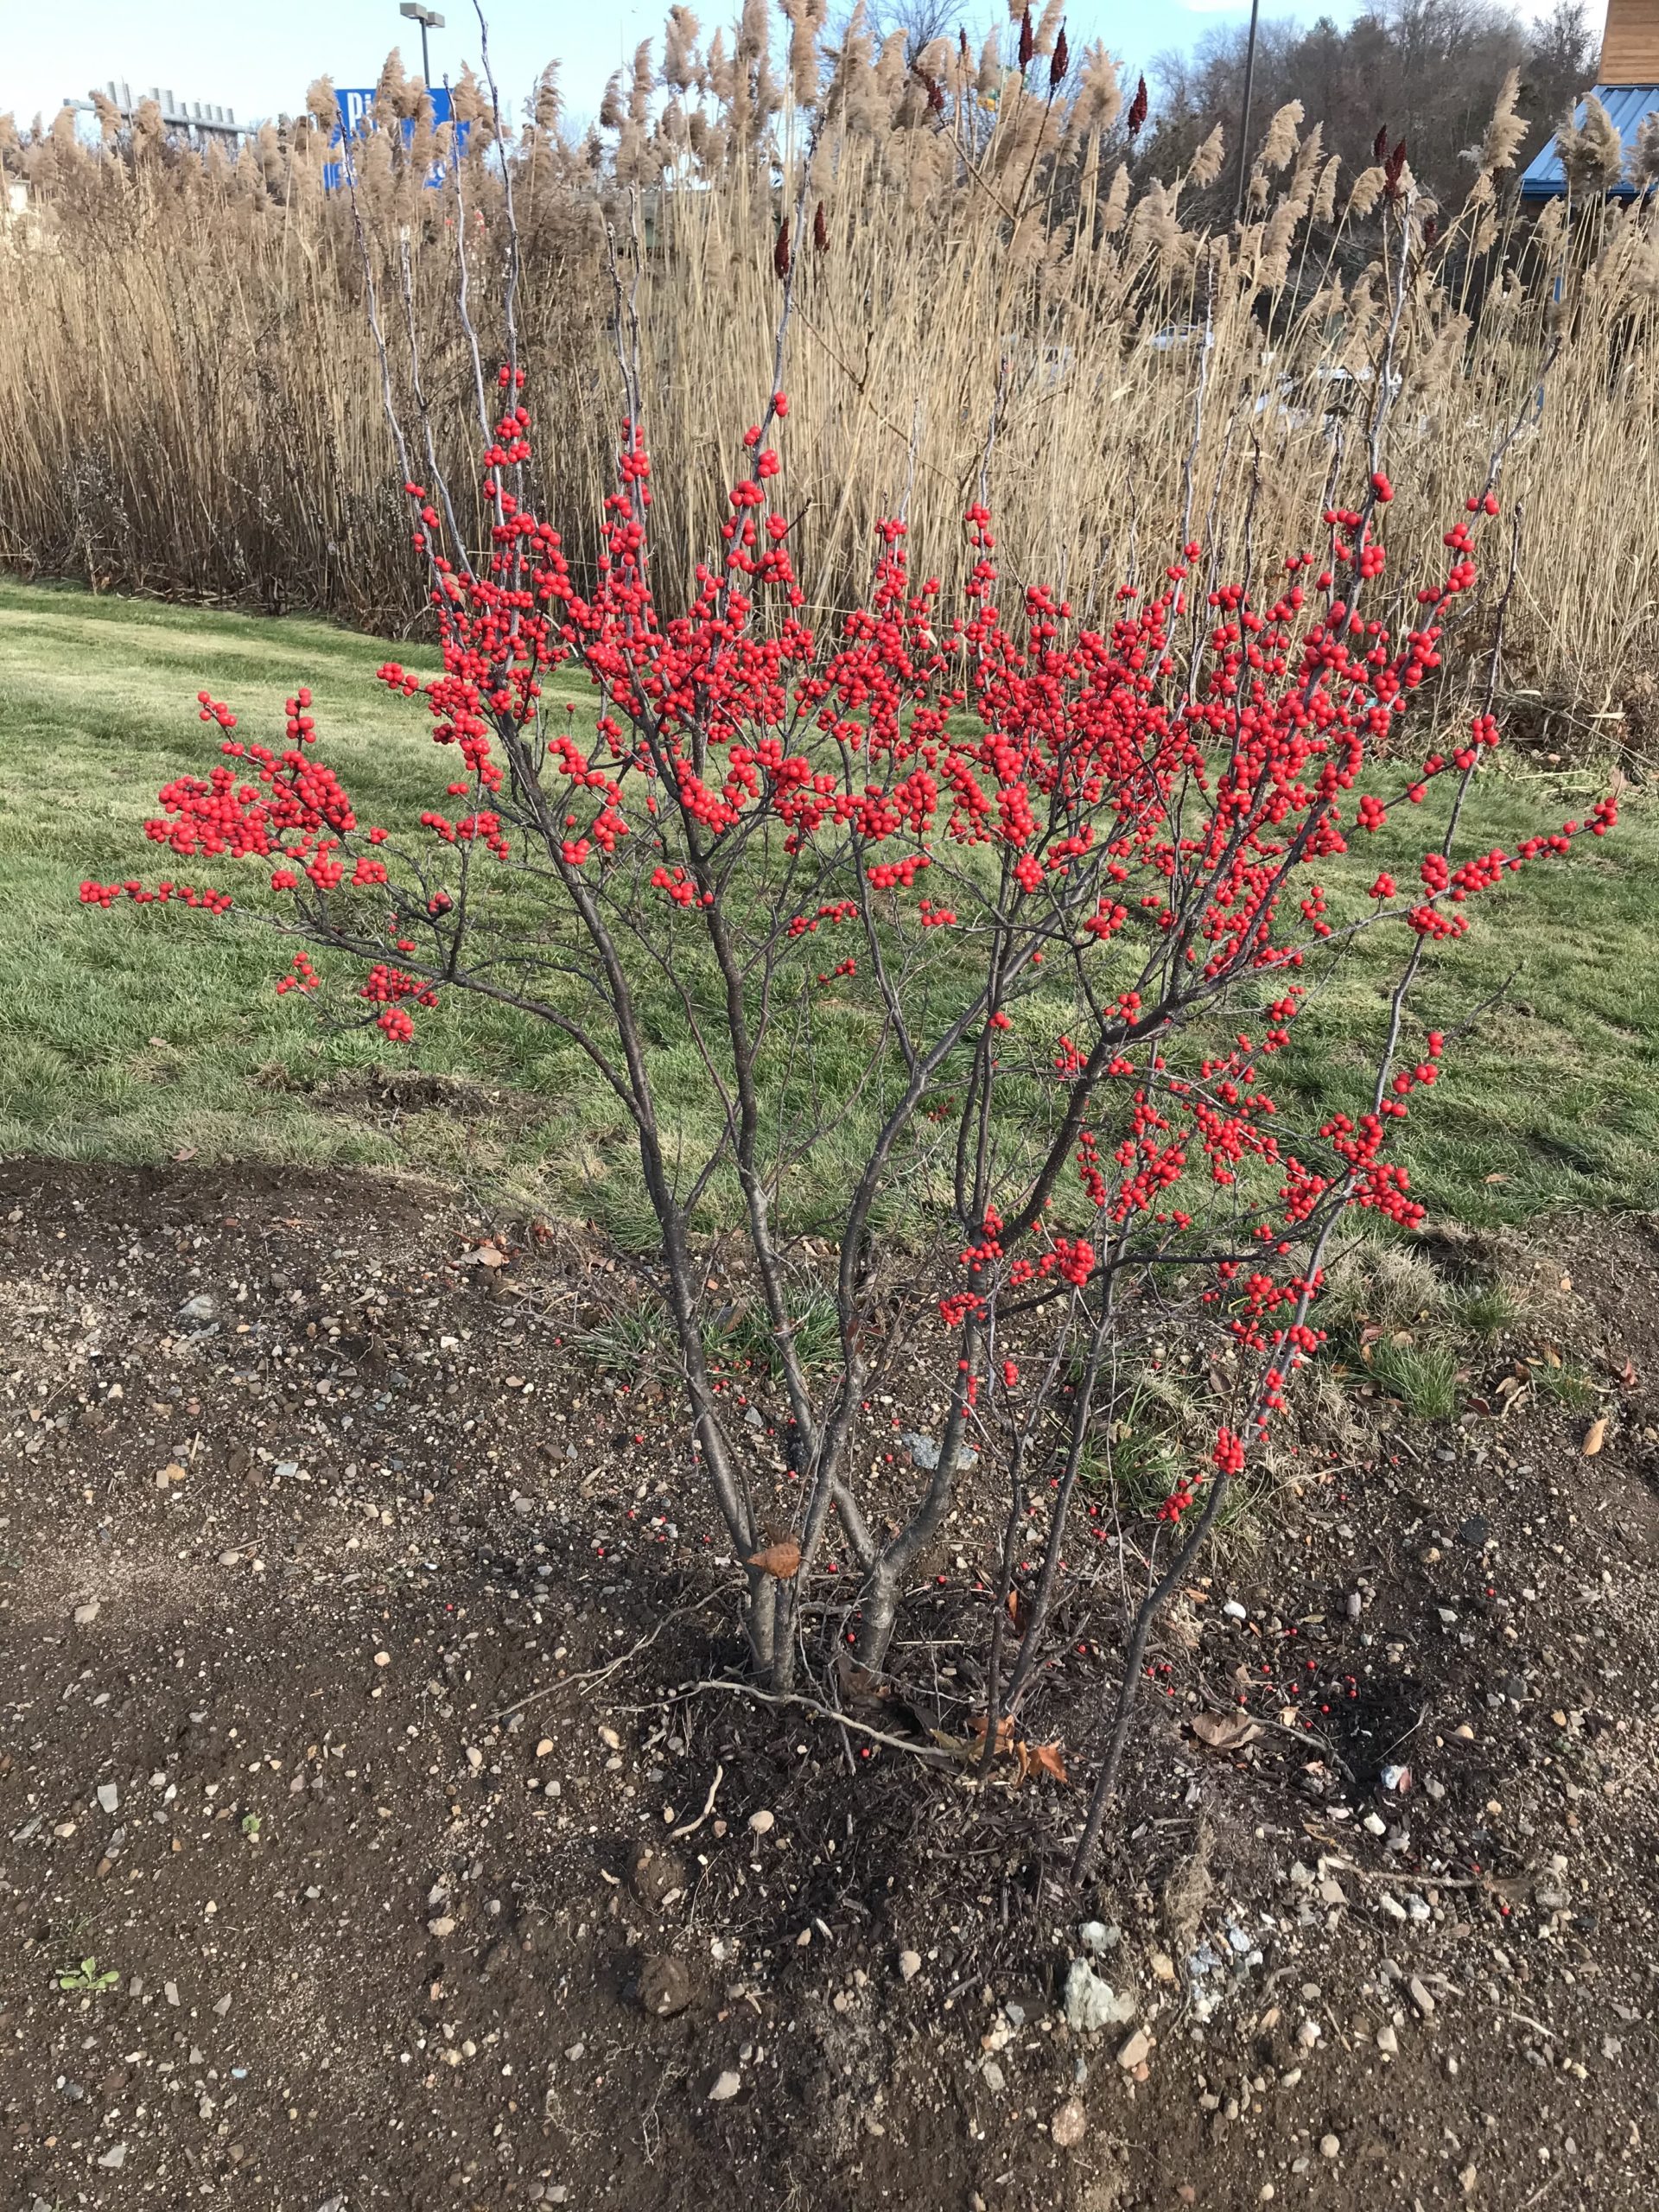 There are a number of cultivated winterberry shrubs available at garden centers and they’re great for off-season color in the landscape. But this one, planted at the periphery of a strip mall, seems to have been abandoned and neglected.